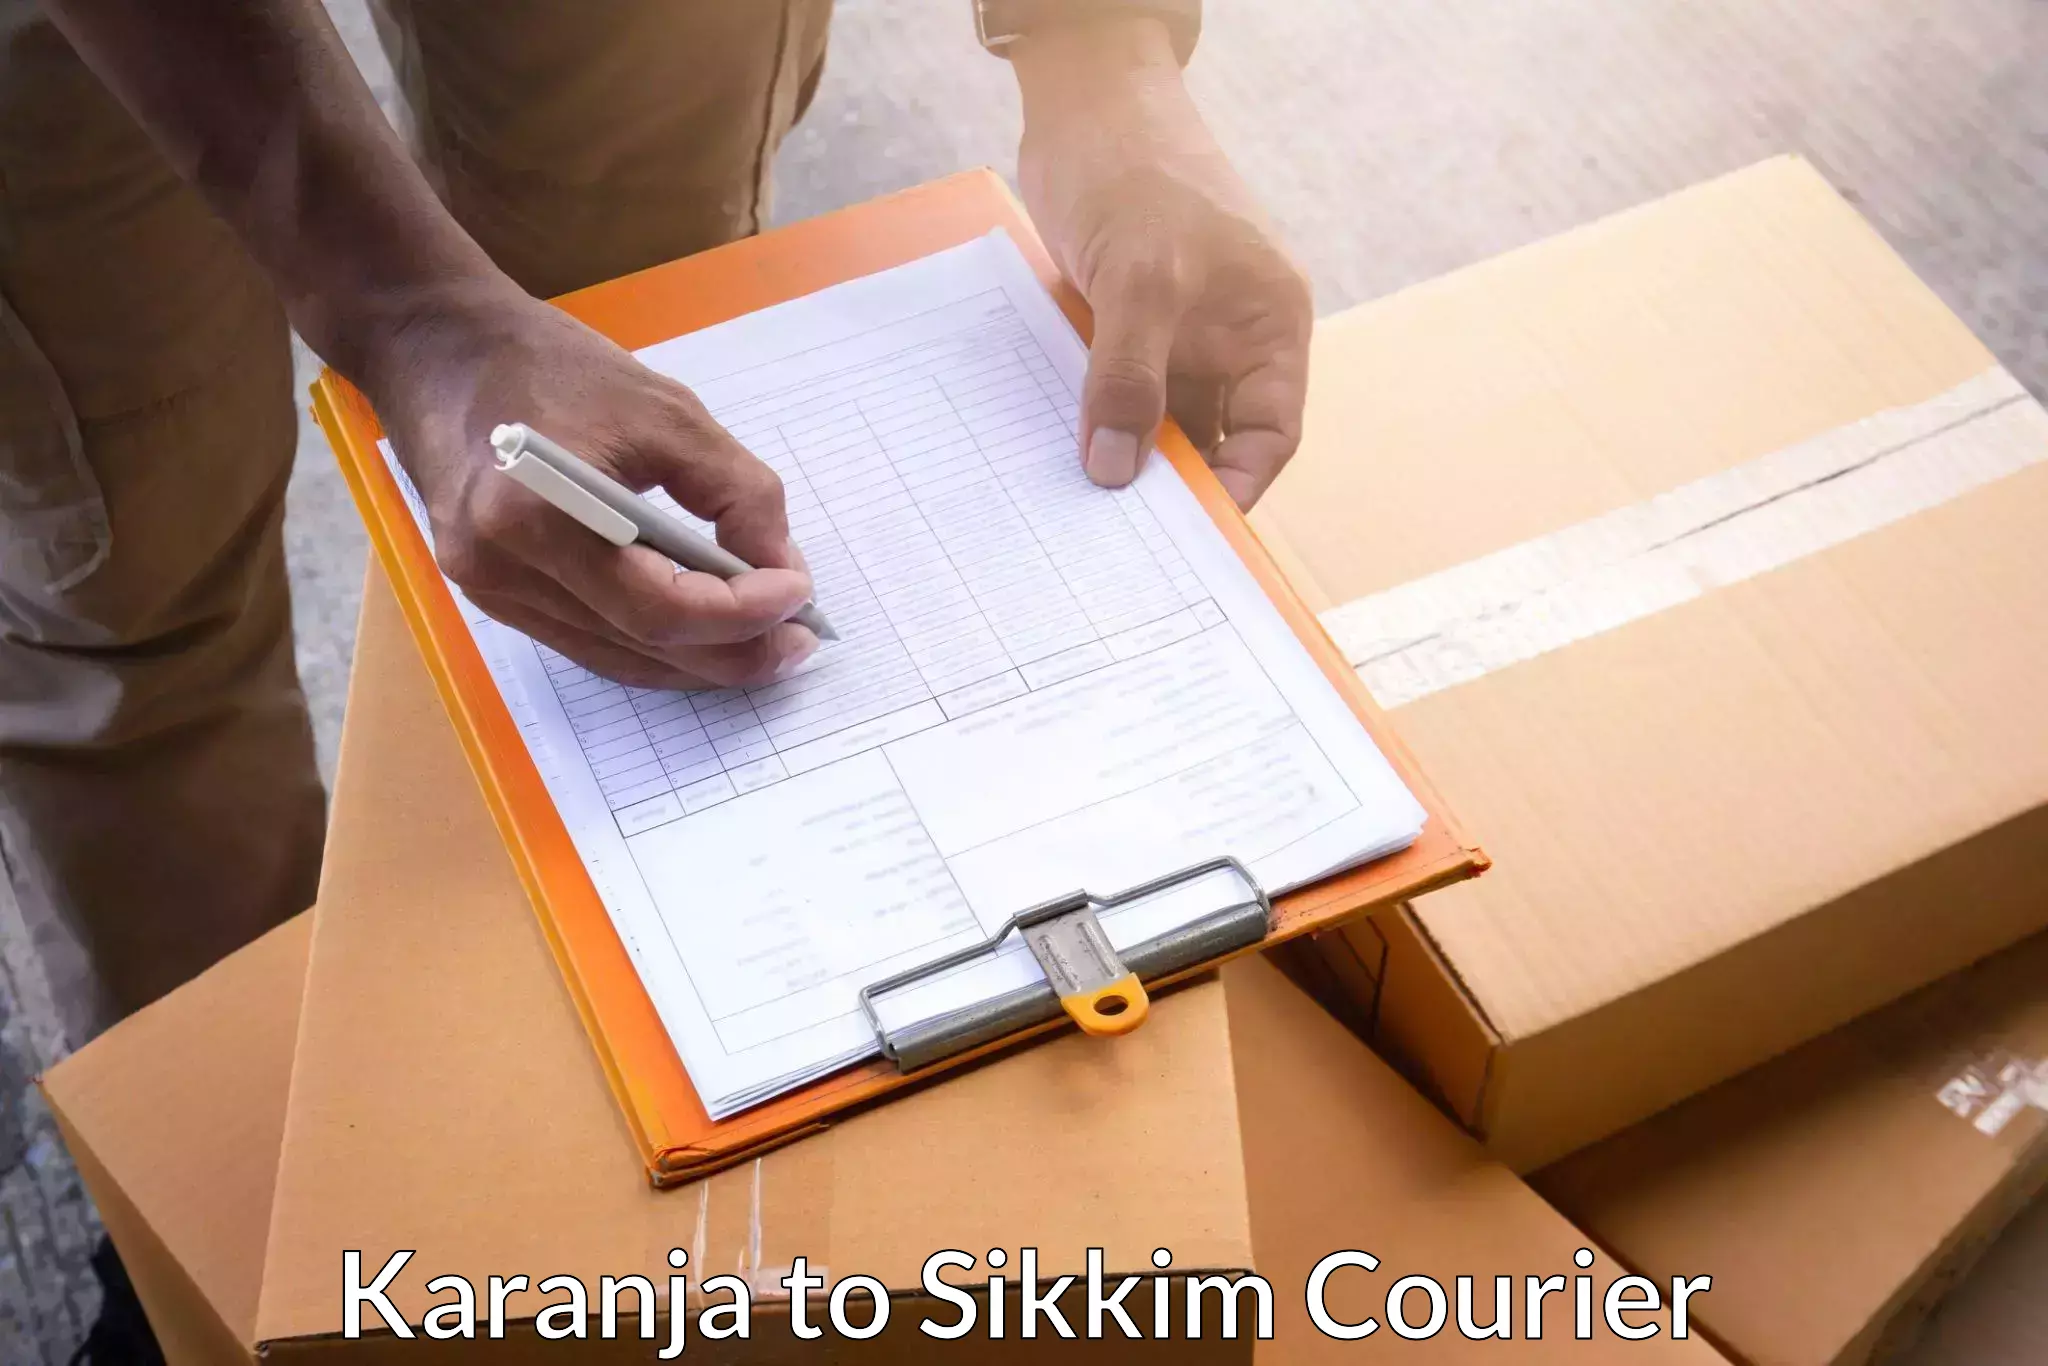 Courier service comparison in Karanja to South Sikkim